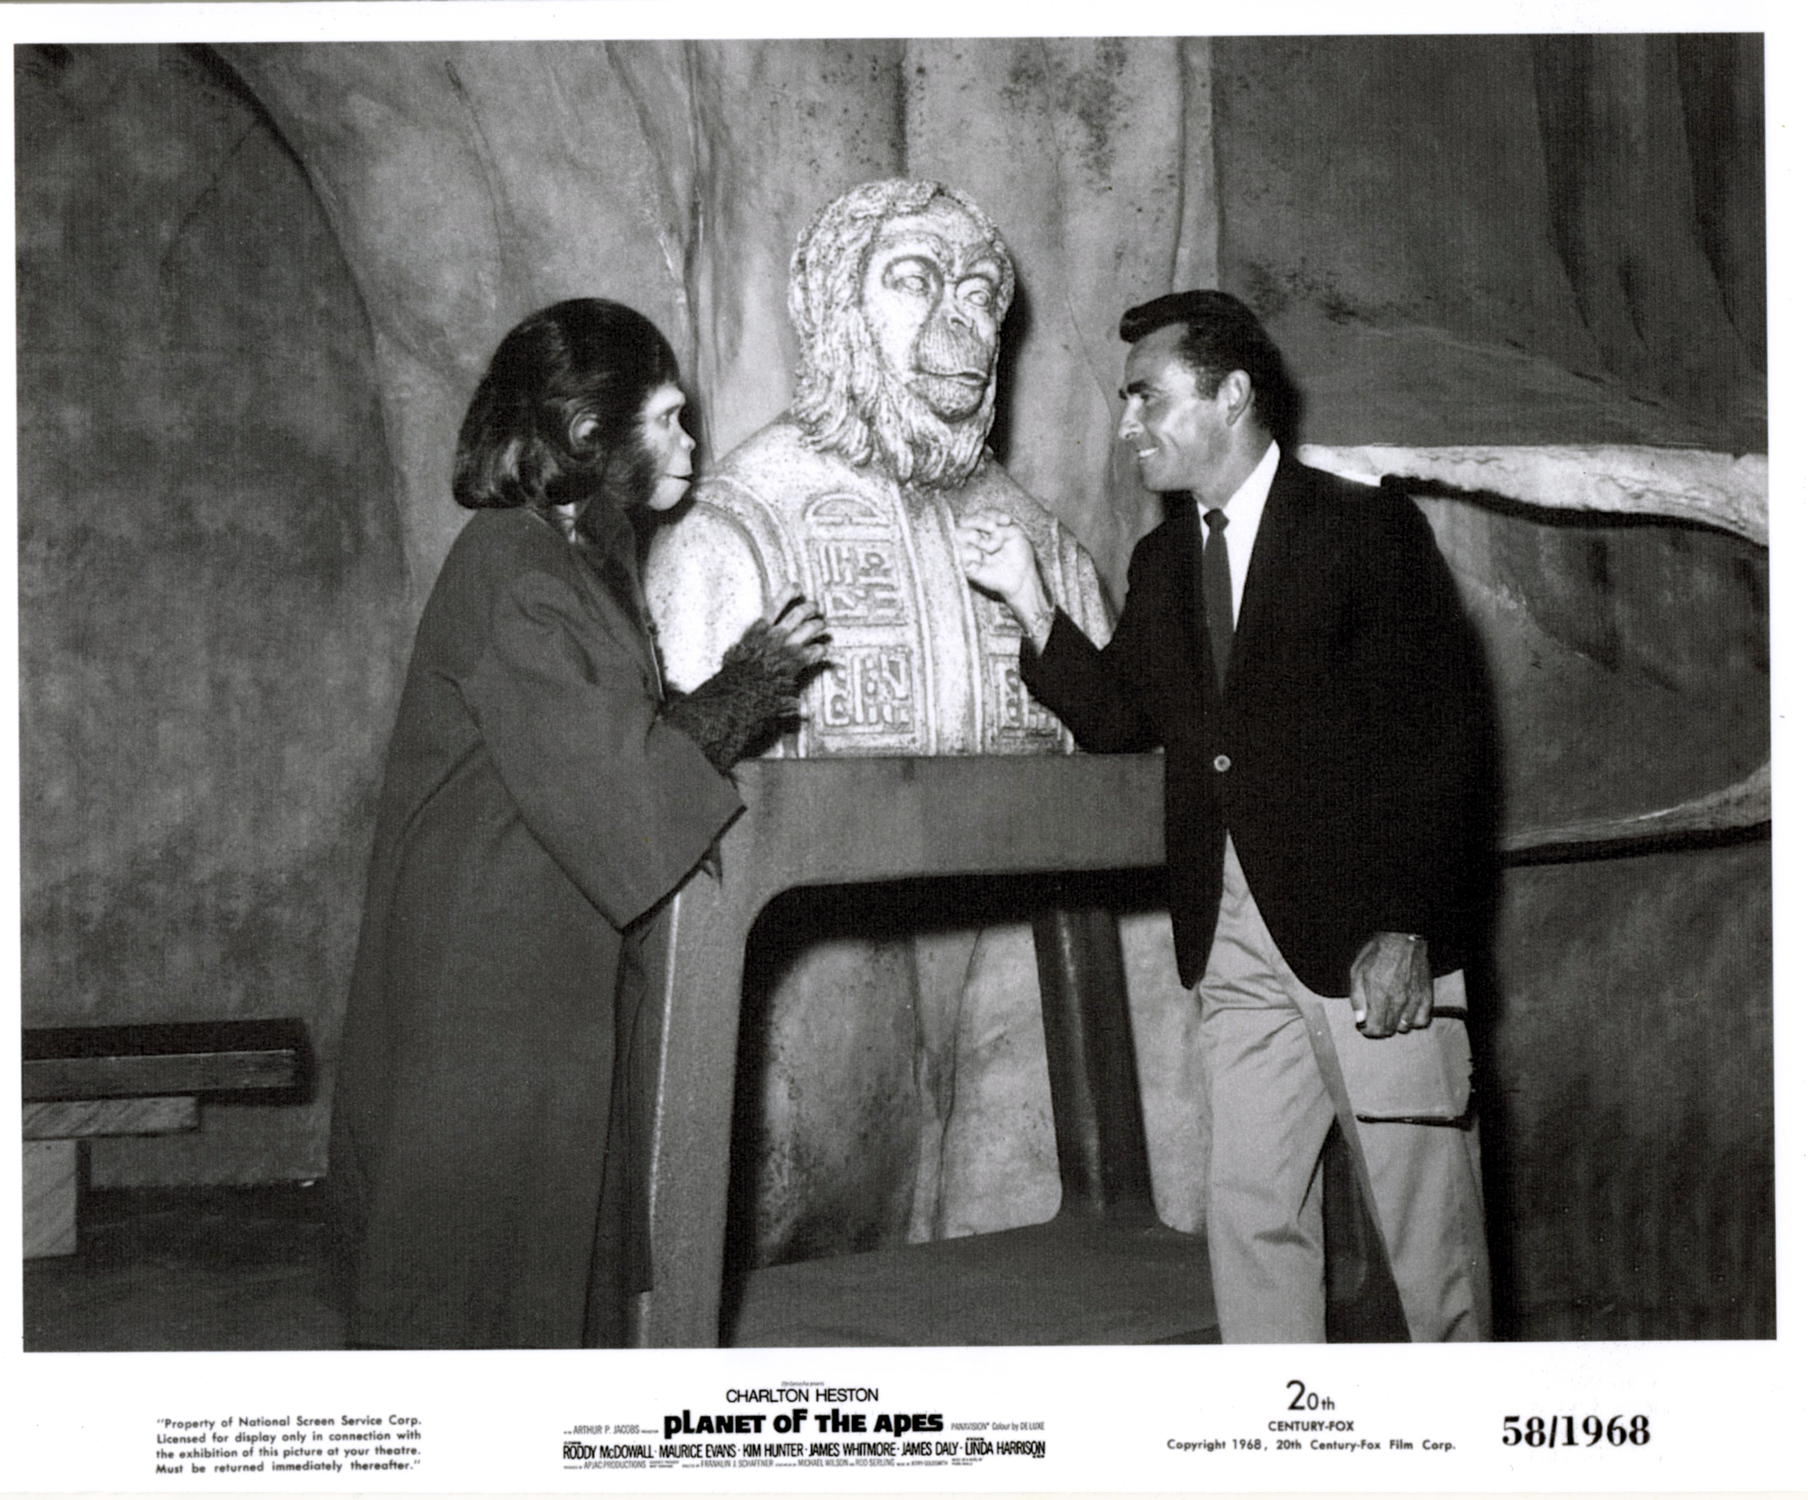  Rod Serling visits the set of  Planet of the Apes  and chats with Kim Hunter, as Dr. Zira, the chimpanzee “animal psychiatrist” who studies humans and befriends Taylor (Charlton Heston). 